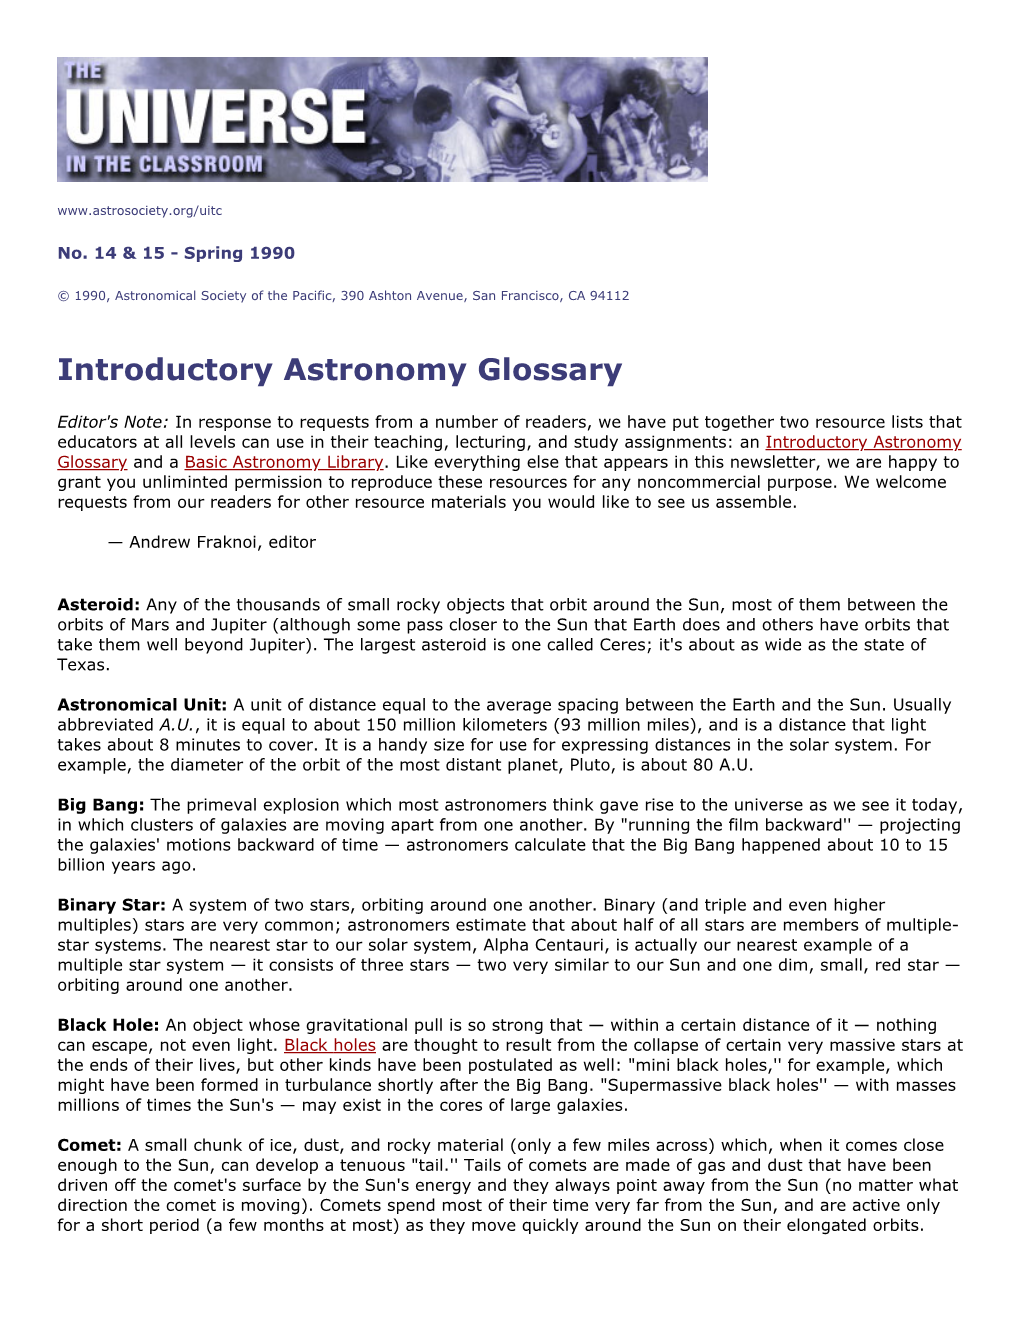 Introductory Astronomy Glossary